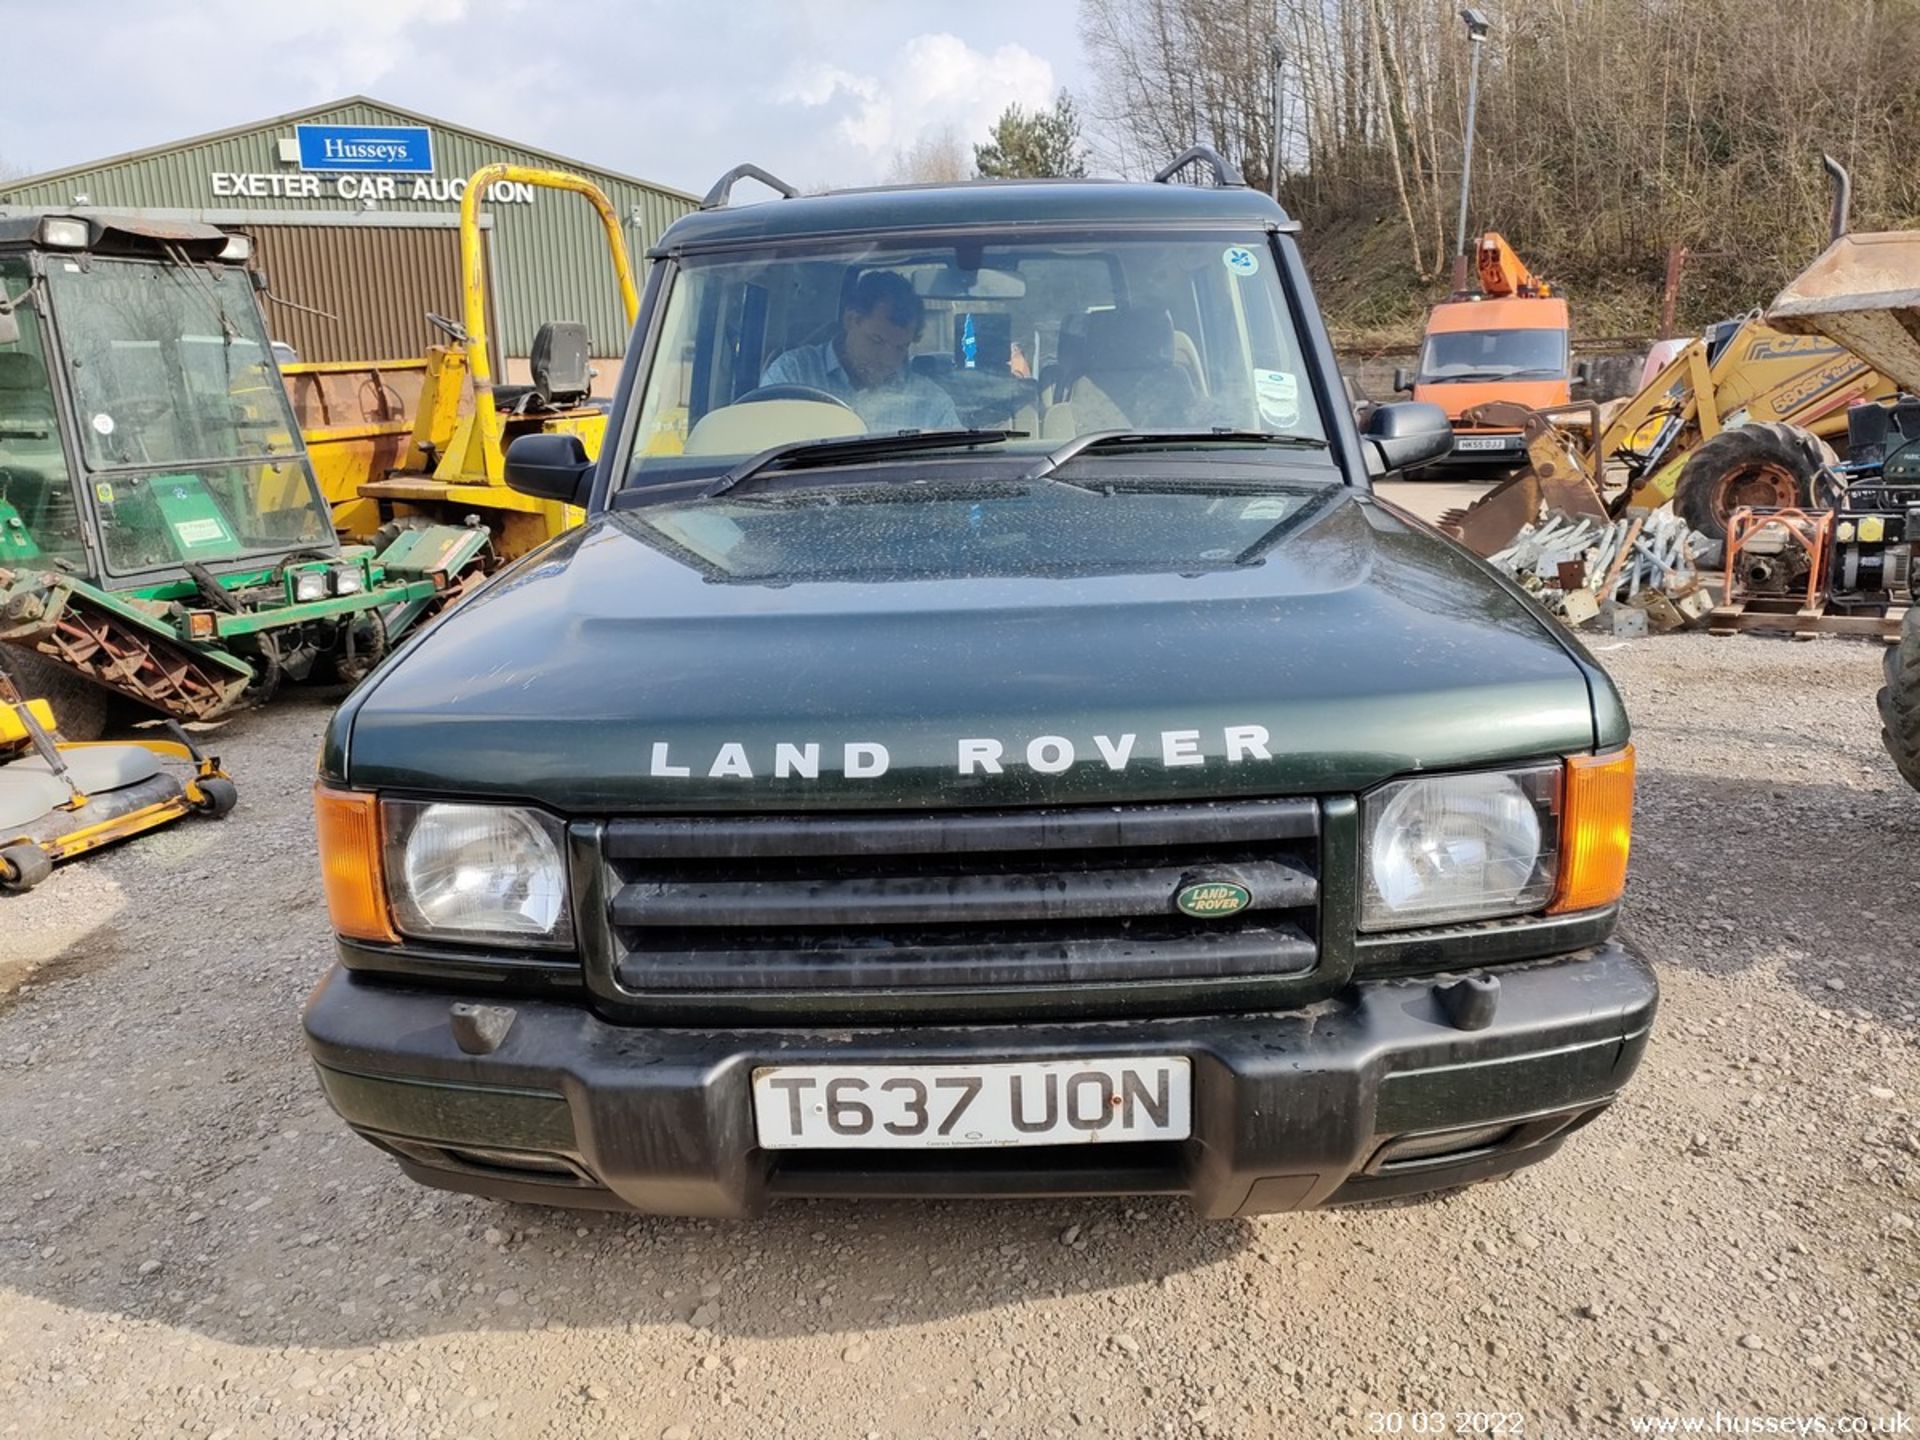 1999 LAND ROVER DISCOVERY TD5 GS - 2495cc 5dr Estate (Green) - Image 3 of 18